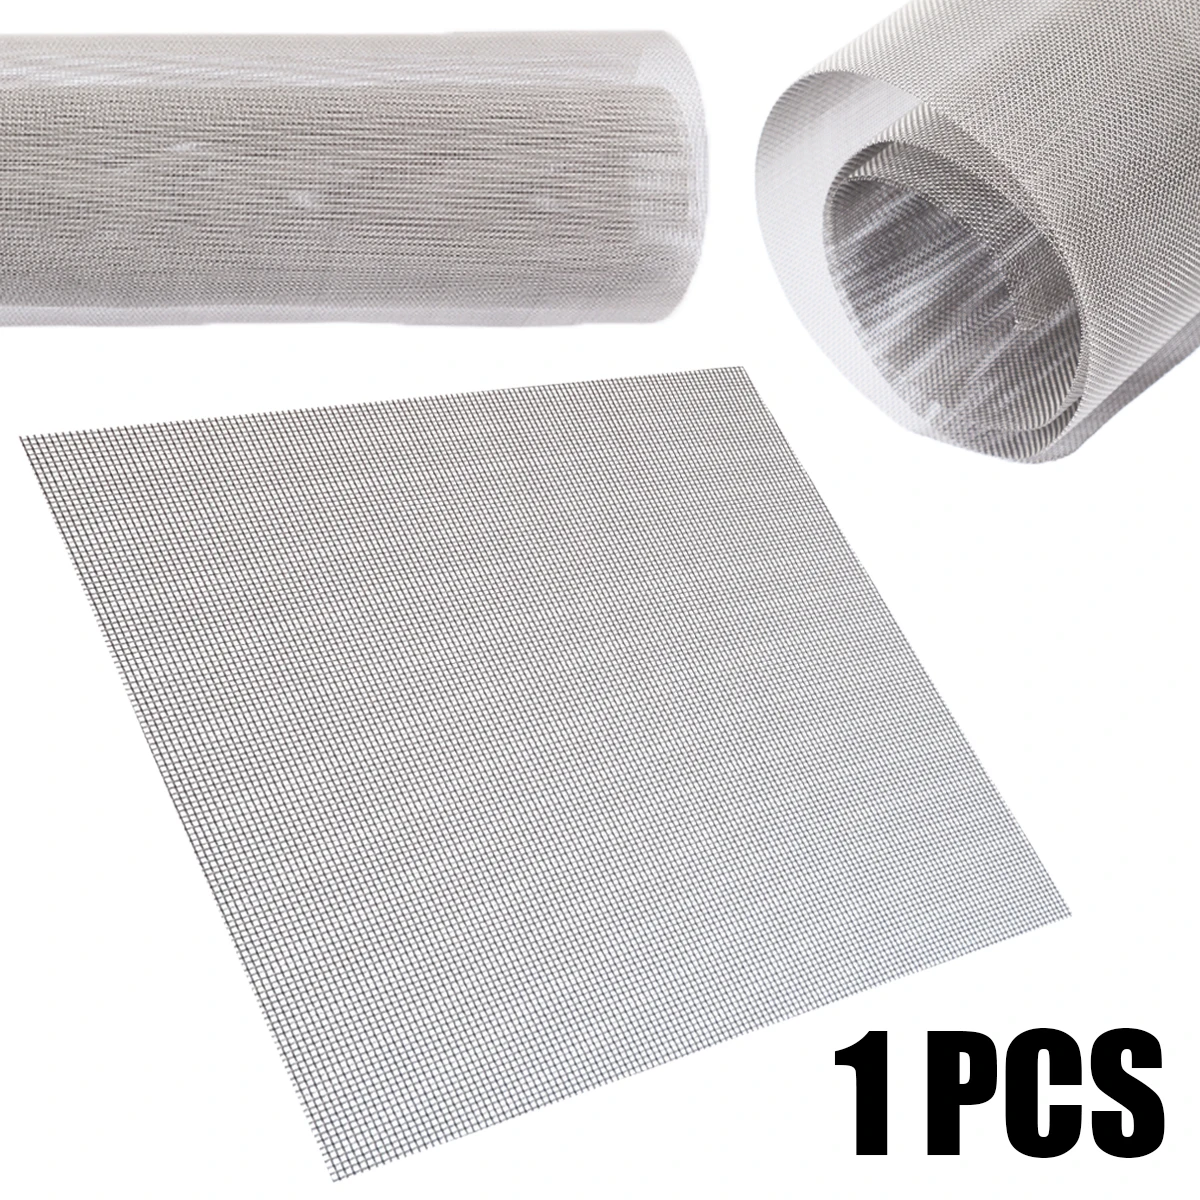 1Pcs 60 Mesh 304 Stainless Steel Filtration Woven Wire Mesh Cloth Screen 30x30cm with Weather Resistance For Industry Tools